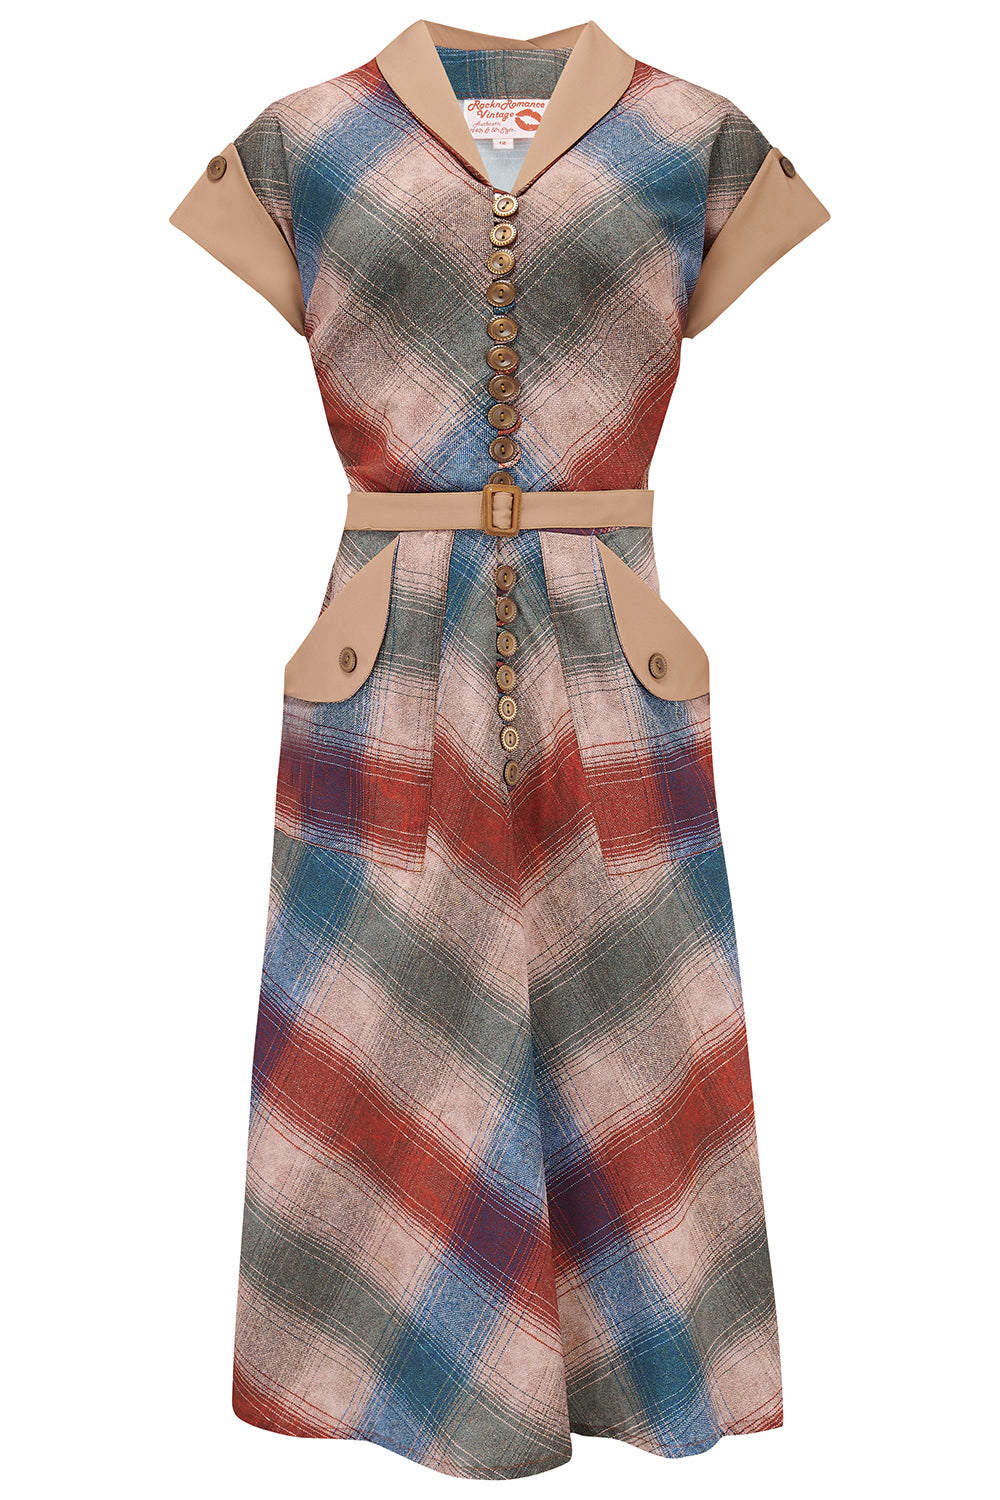 The "Casey" Dress in Cotswold Check Print, True & Authentic 1950s Vintage Style